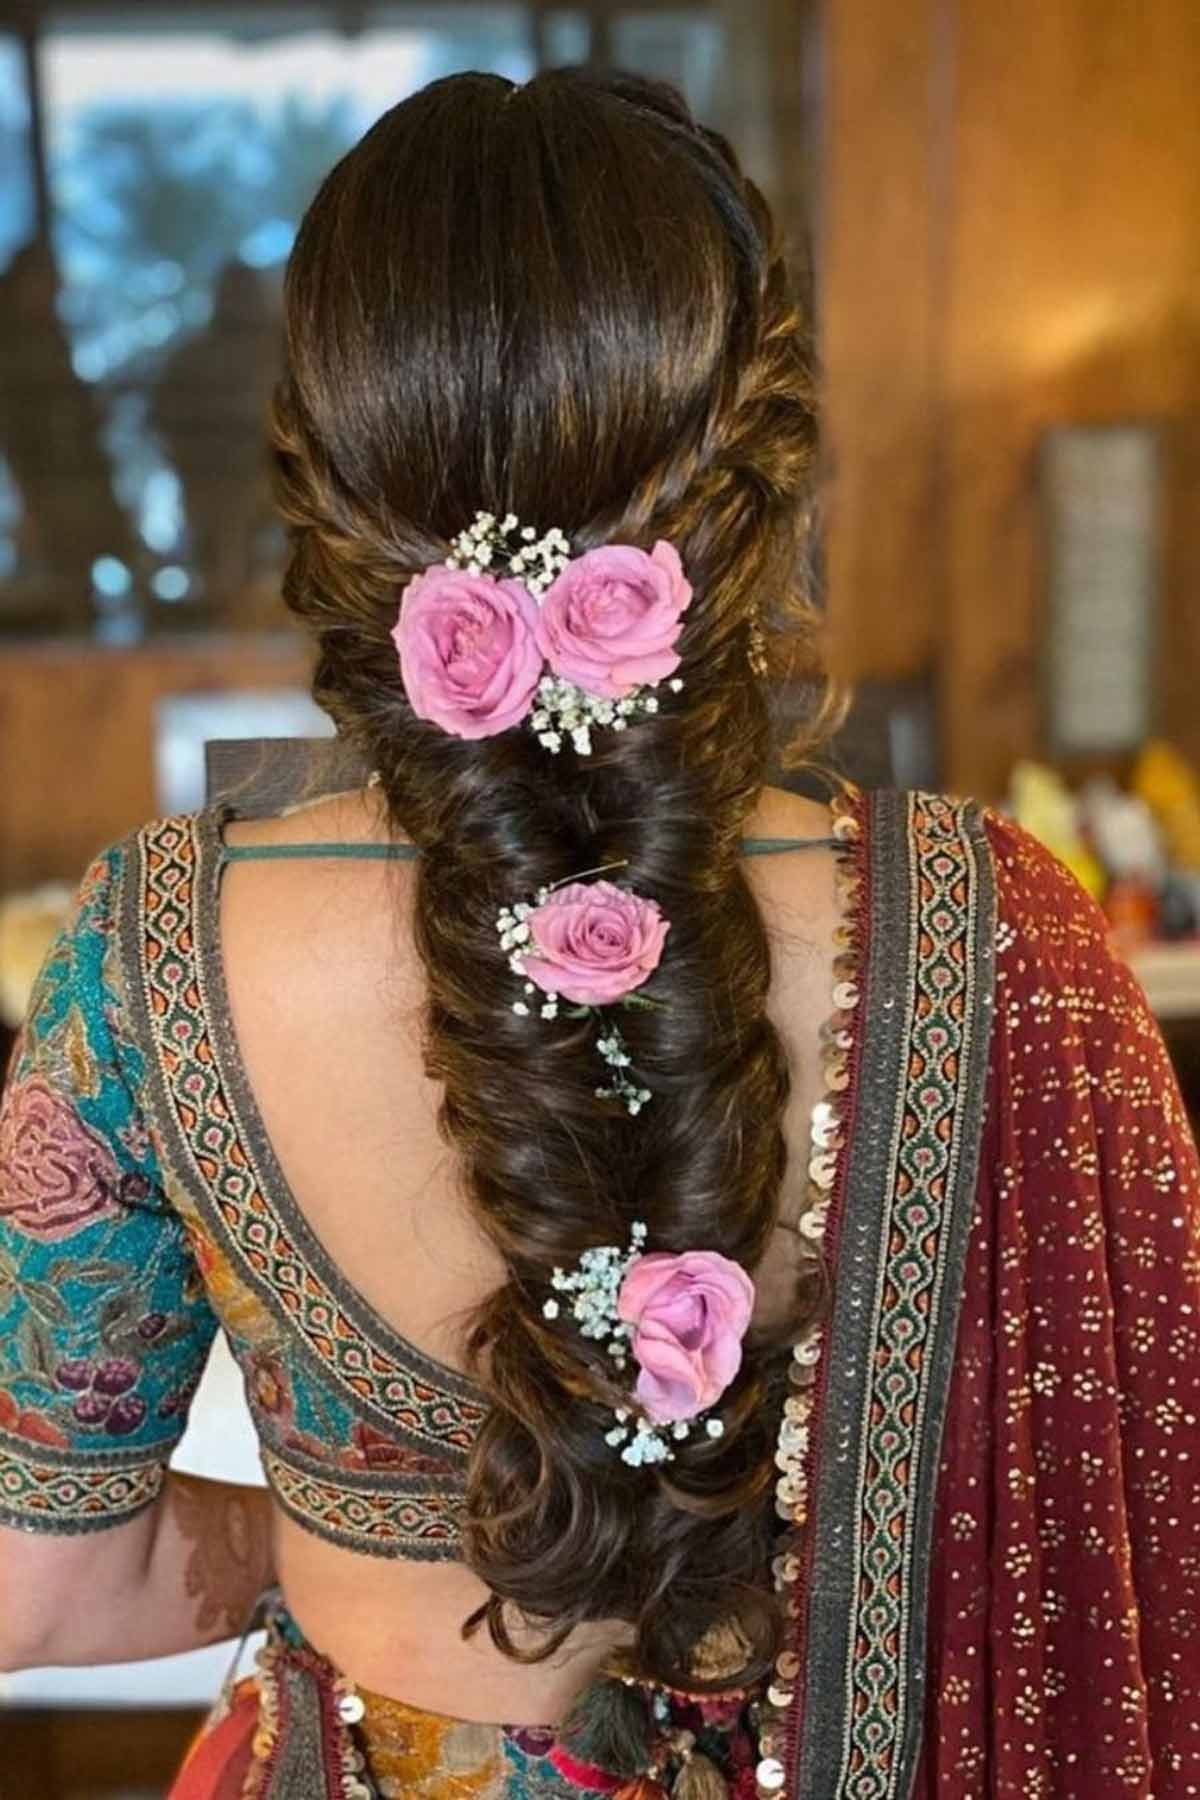 18 Stylish Hairstyles for Saree | Matching Hairstyles with Saree ideas 2024  - SizeSavvy